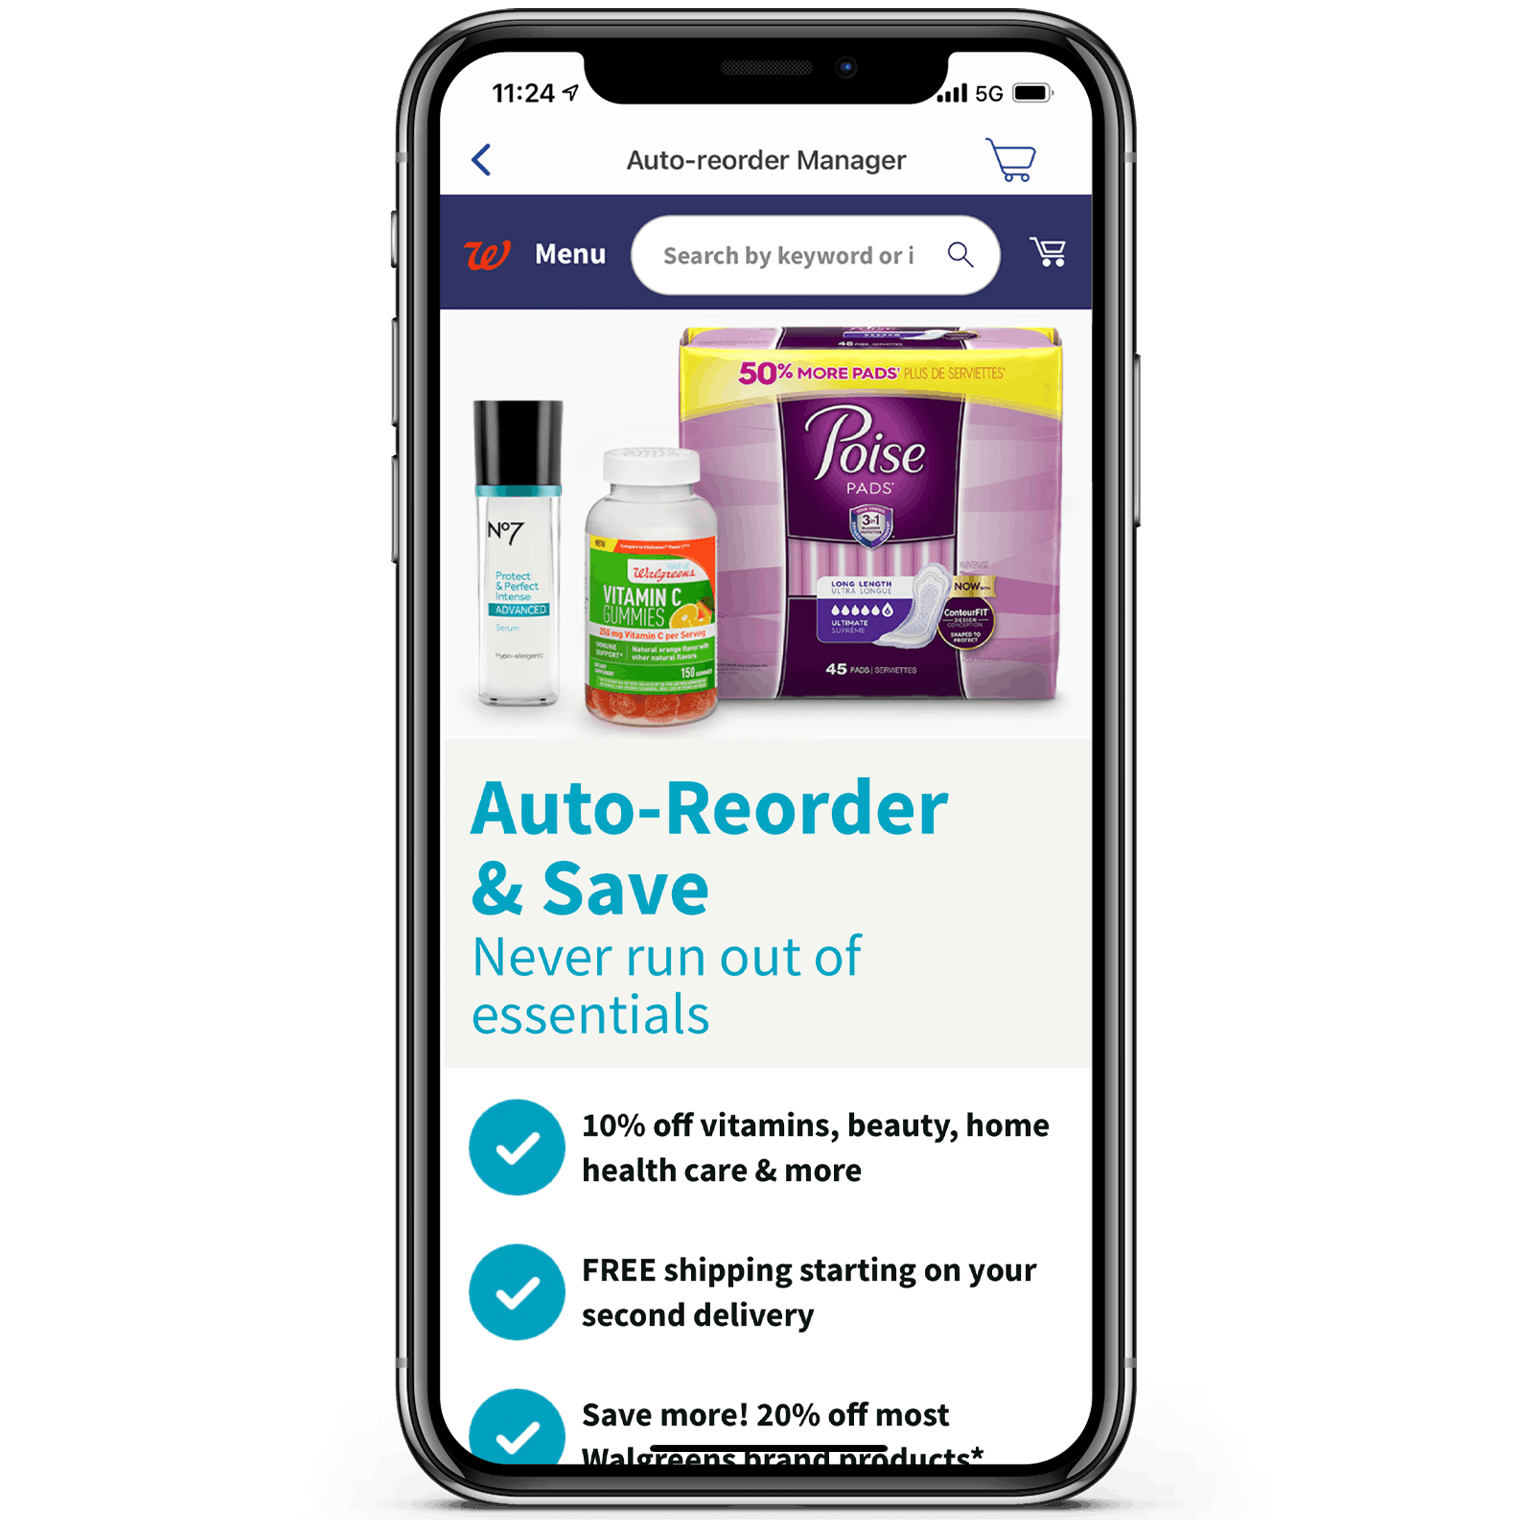 Walgreens auto-reorder info in the app.